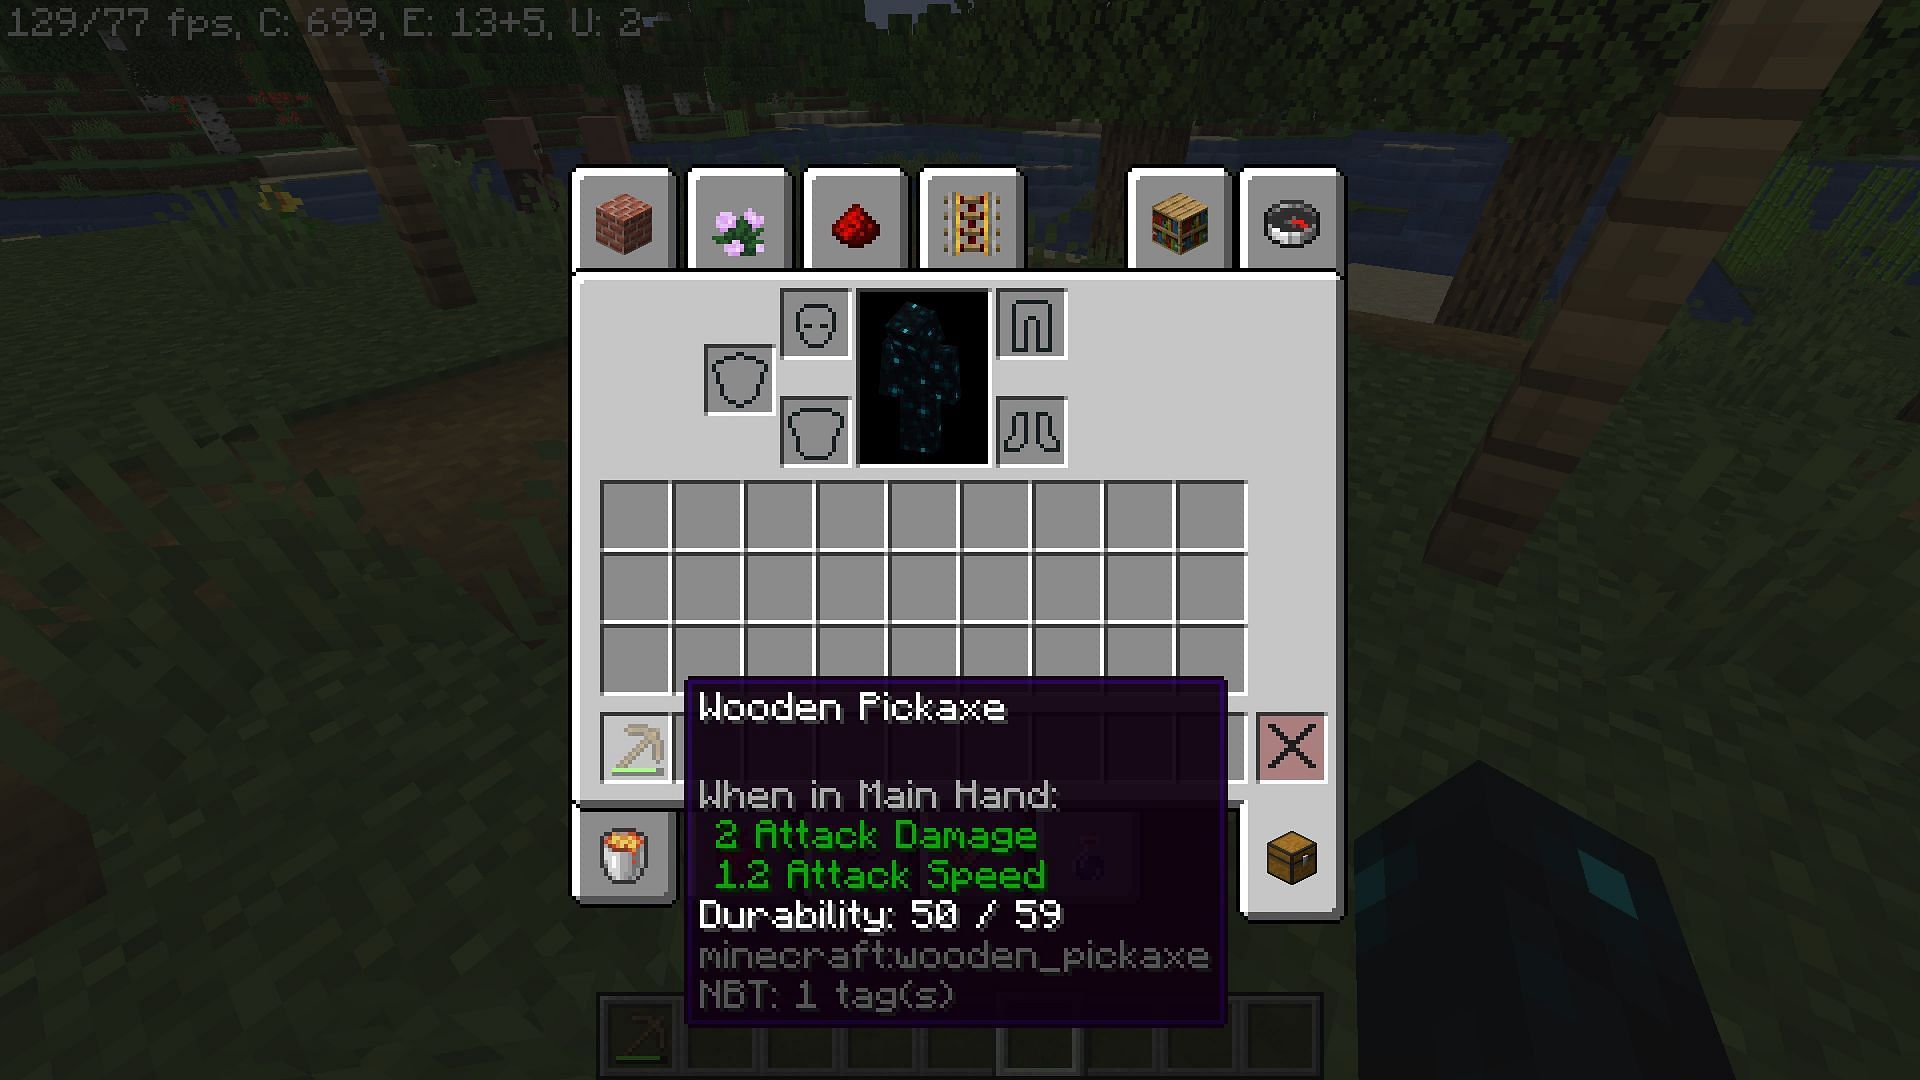 Is this a glitch in Minecraft armor durability? - Arqade